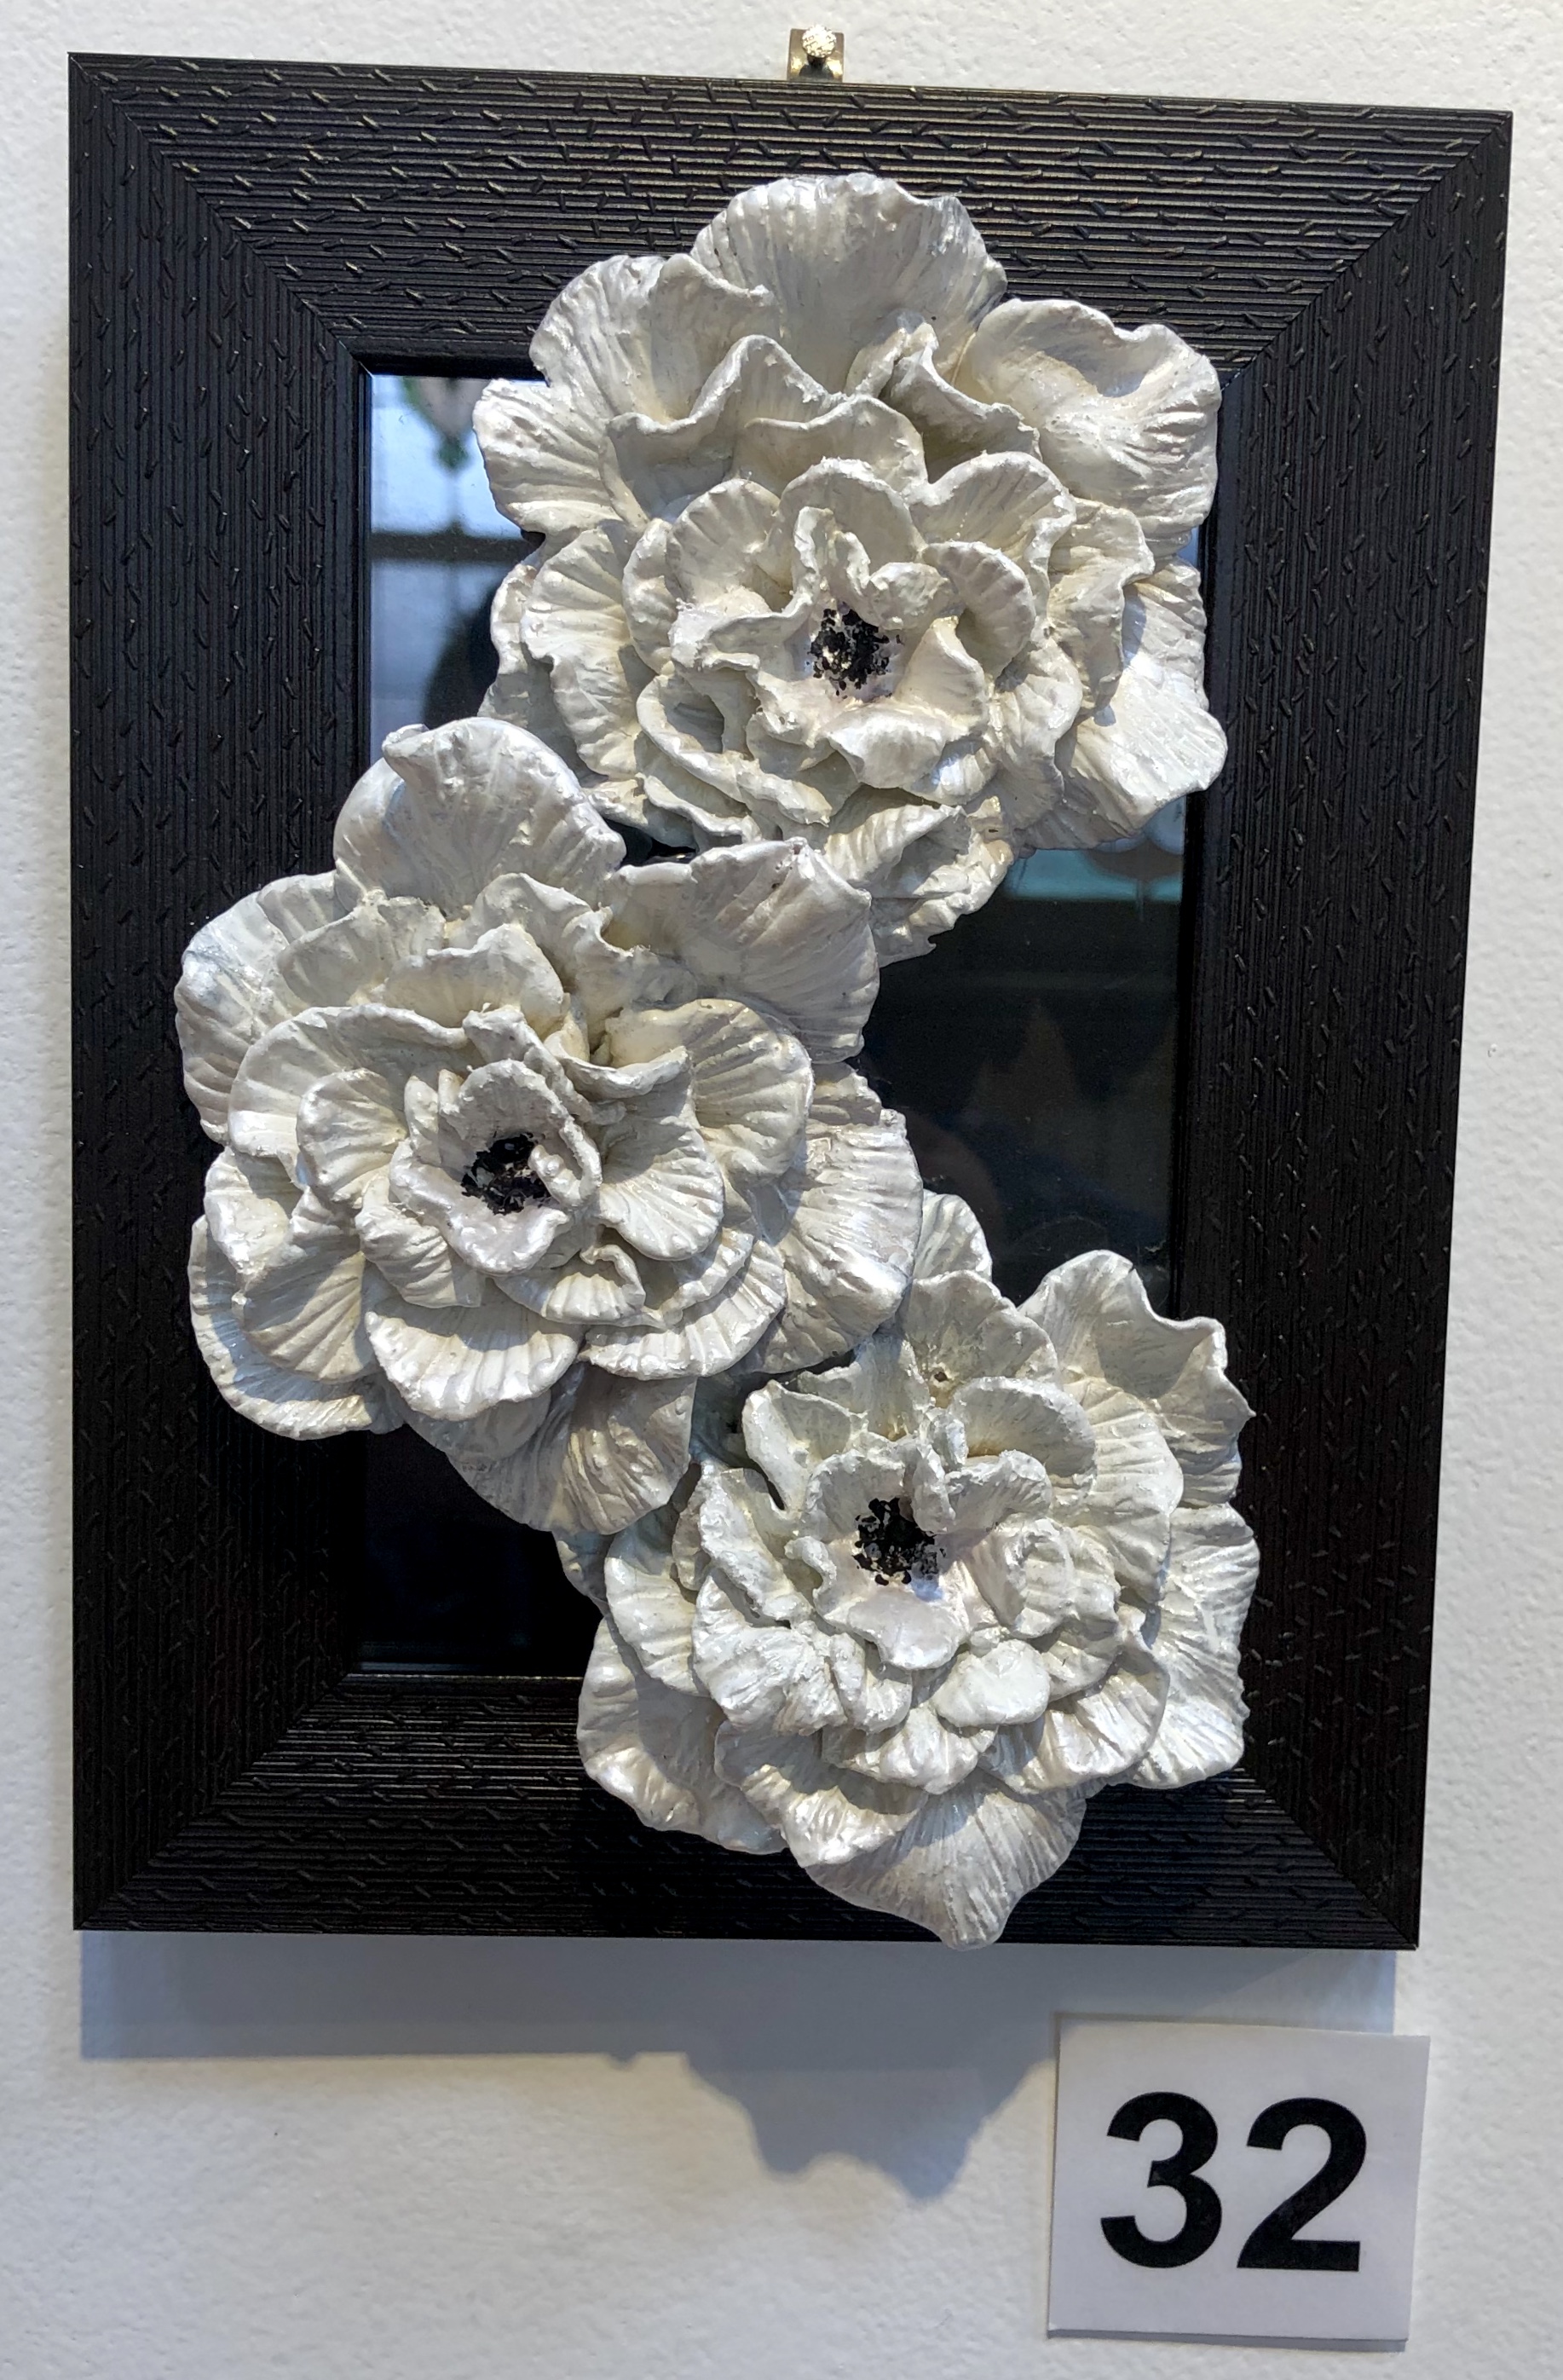 "White corsage" by Evelyn Lay